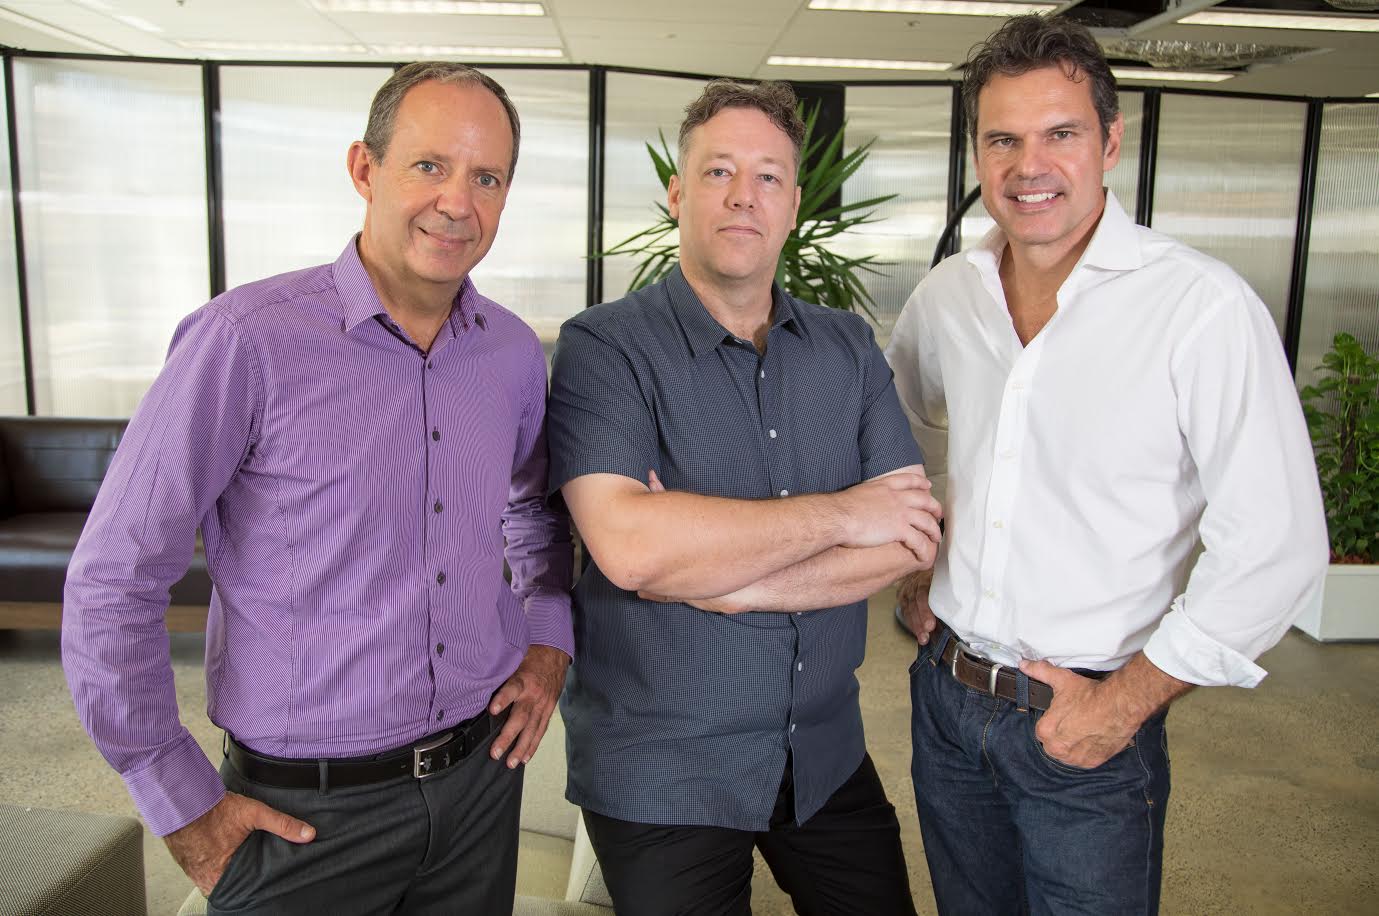 Left to right: Investfit founders James Claridge, Gavin Daw and Ed de Salis